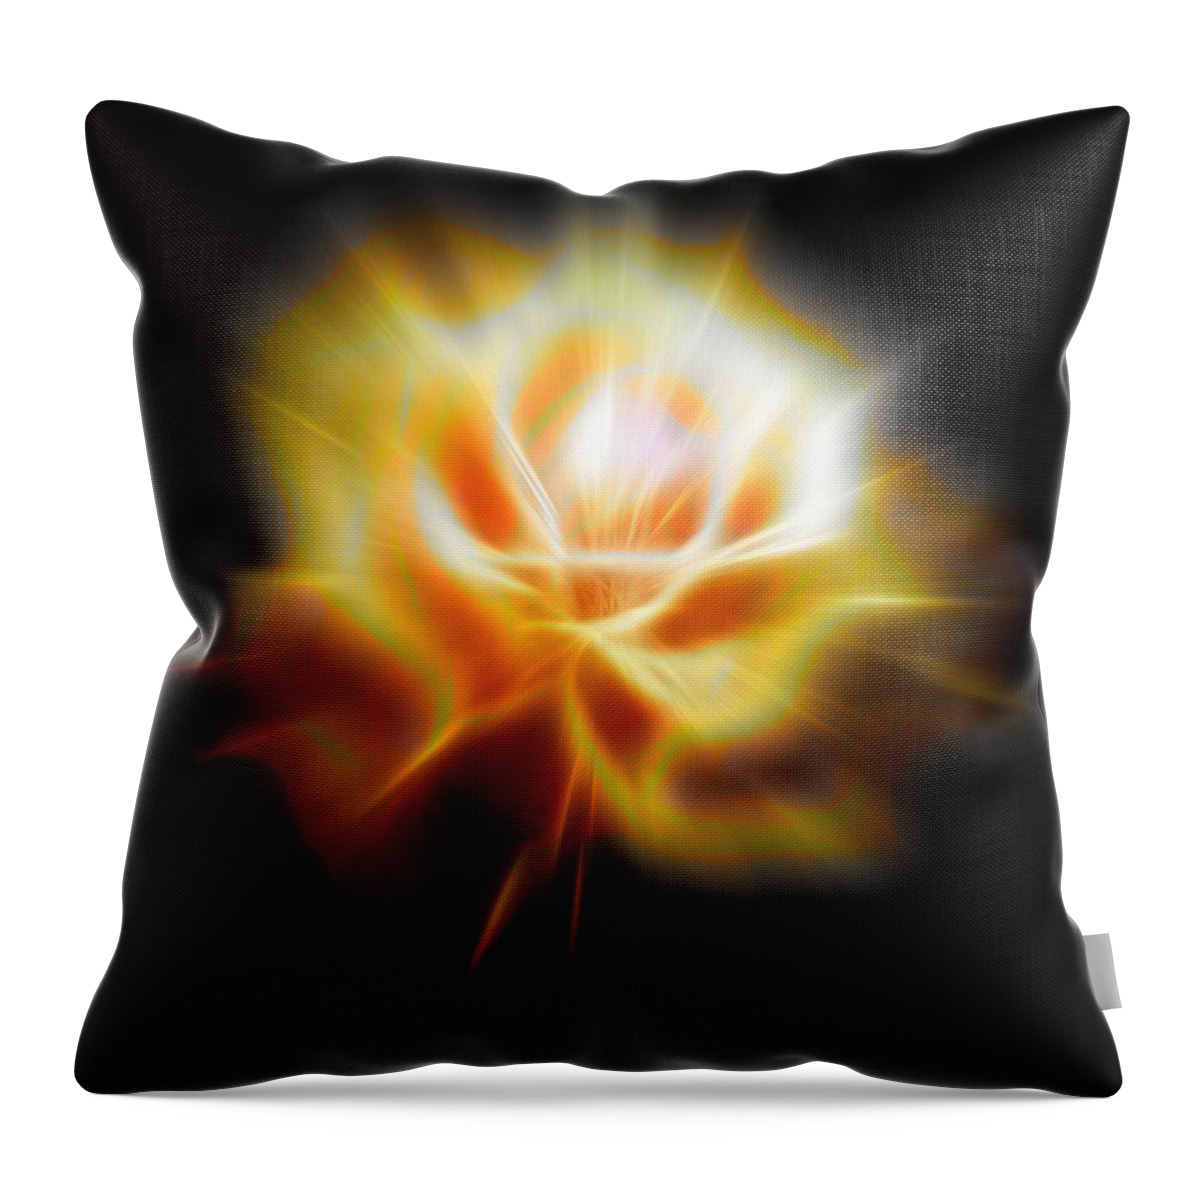 Yellow Throw Pillow featuring the digital art Yellow glowing Rose by Lilia D